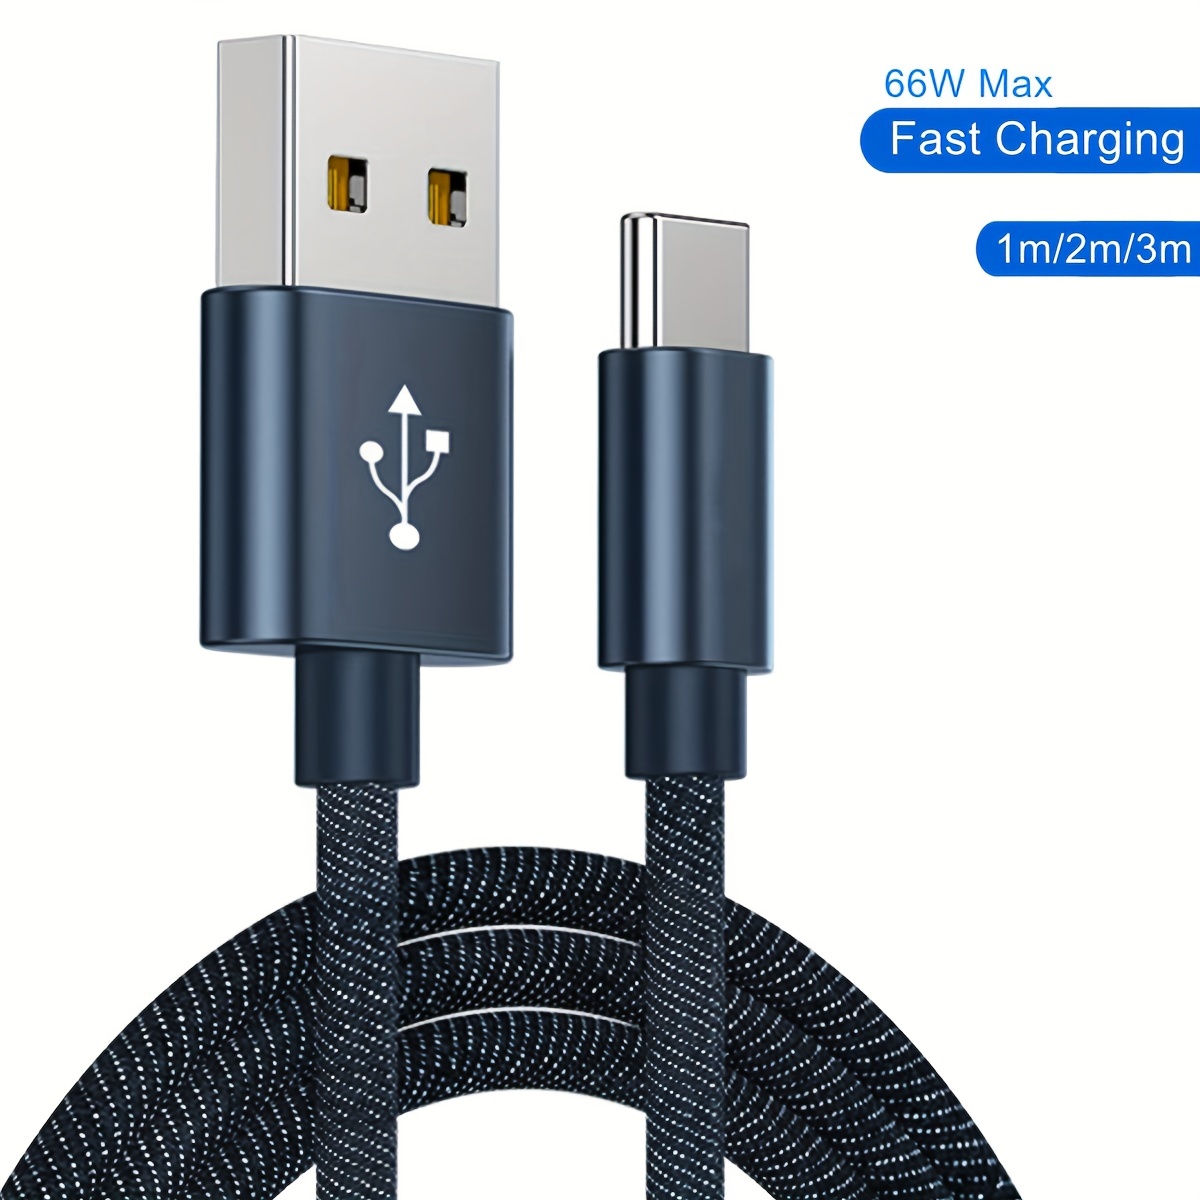 

Usb Type C Cable Fast Charging Data Cable For Vivo Oppo Redmi And More Usb C Smartphones Charger Cable